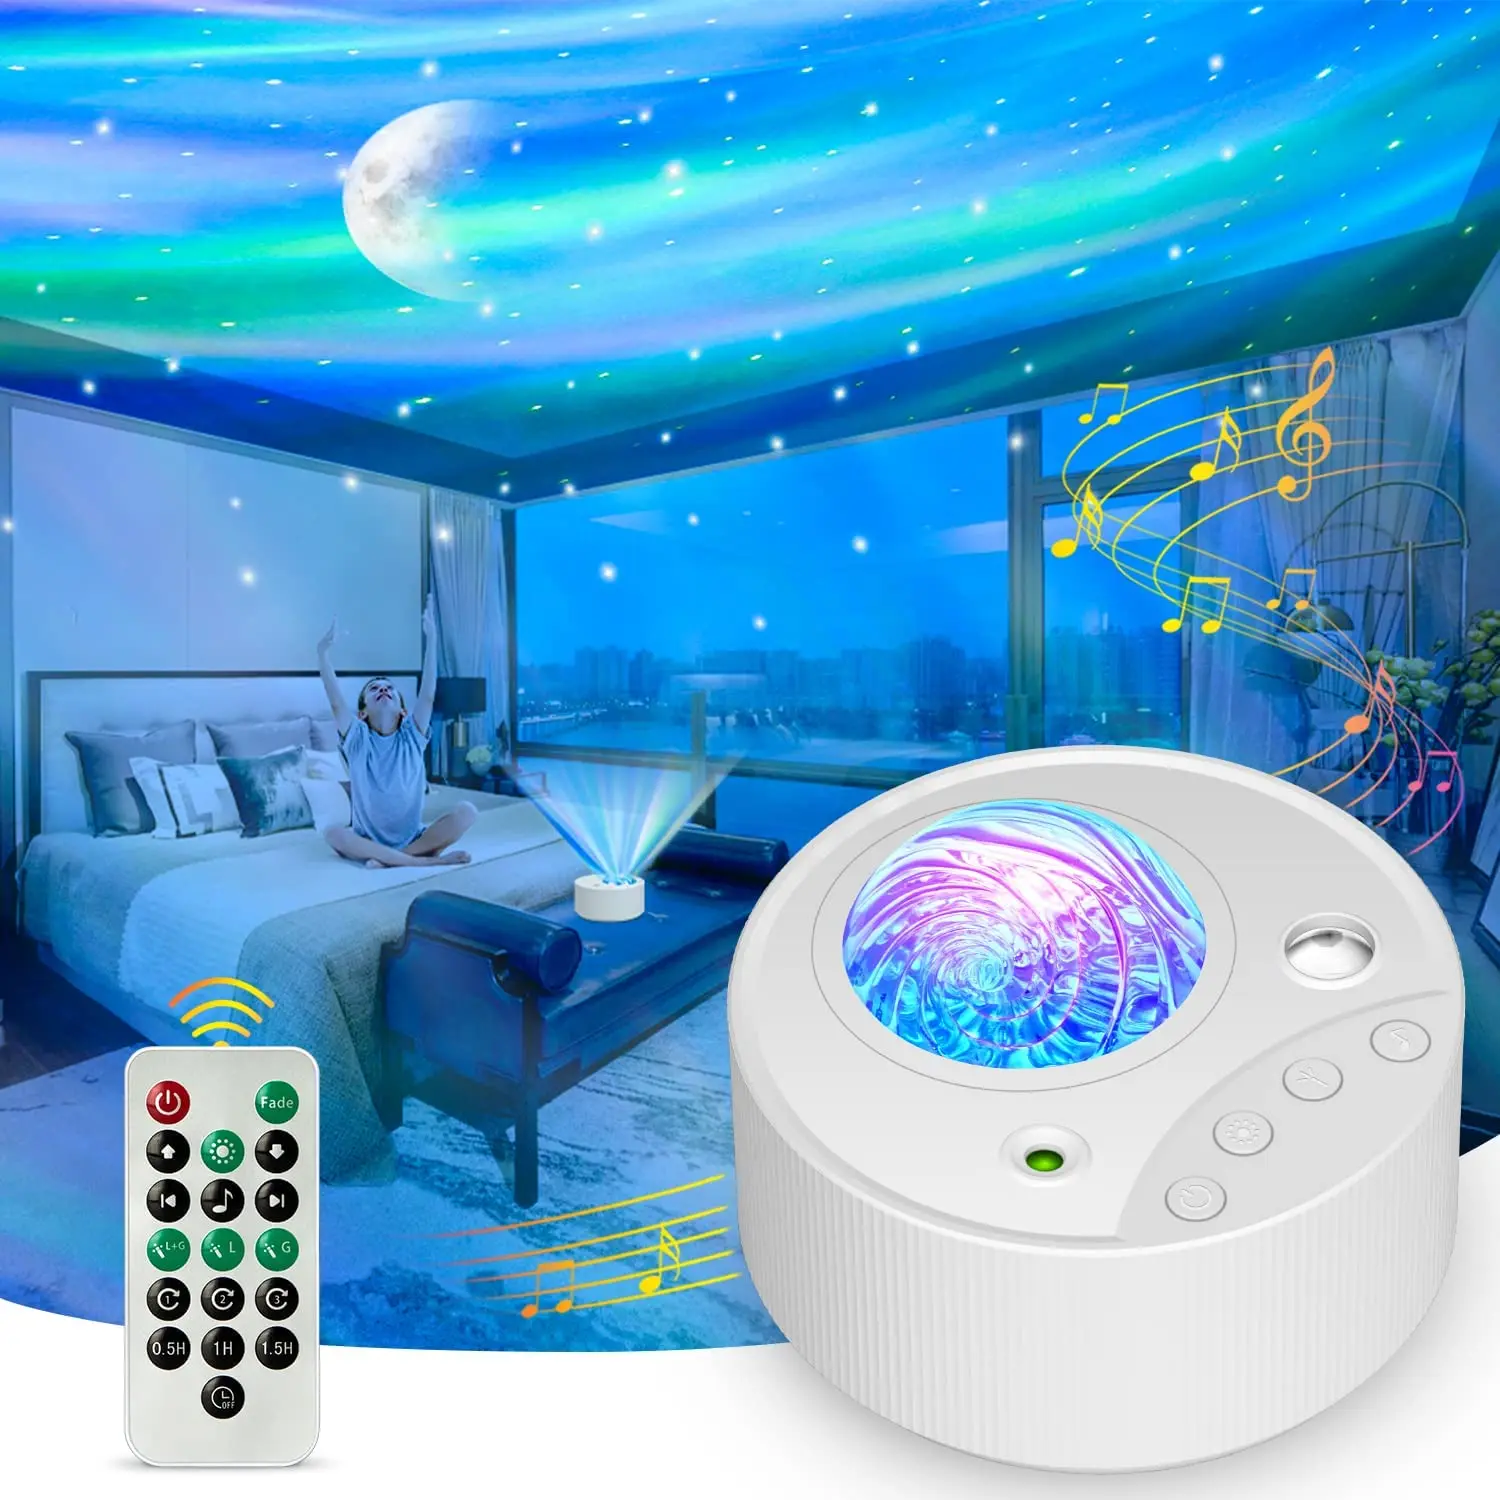 

Aurora Borealis Starry Sky Projector Night Light with Remote Timer Moon LED Lamp Kids Bedroom Home Room Decorative Nightlights